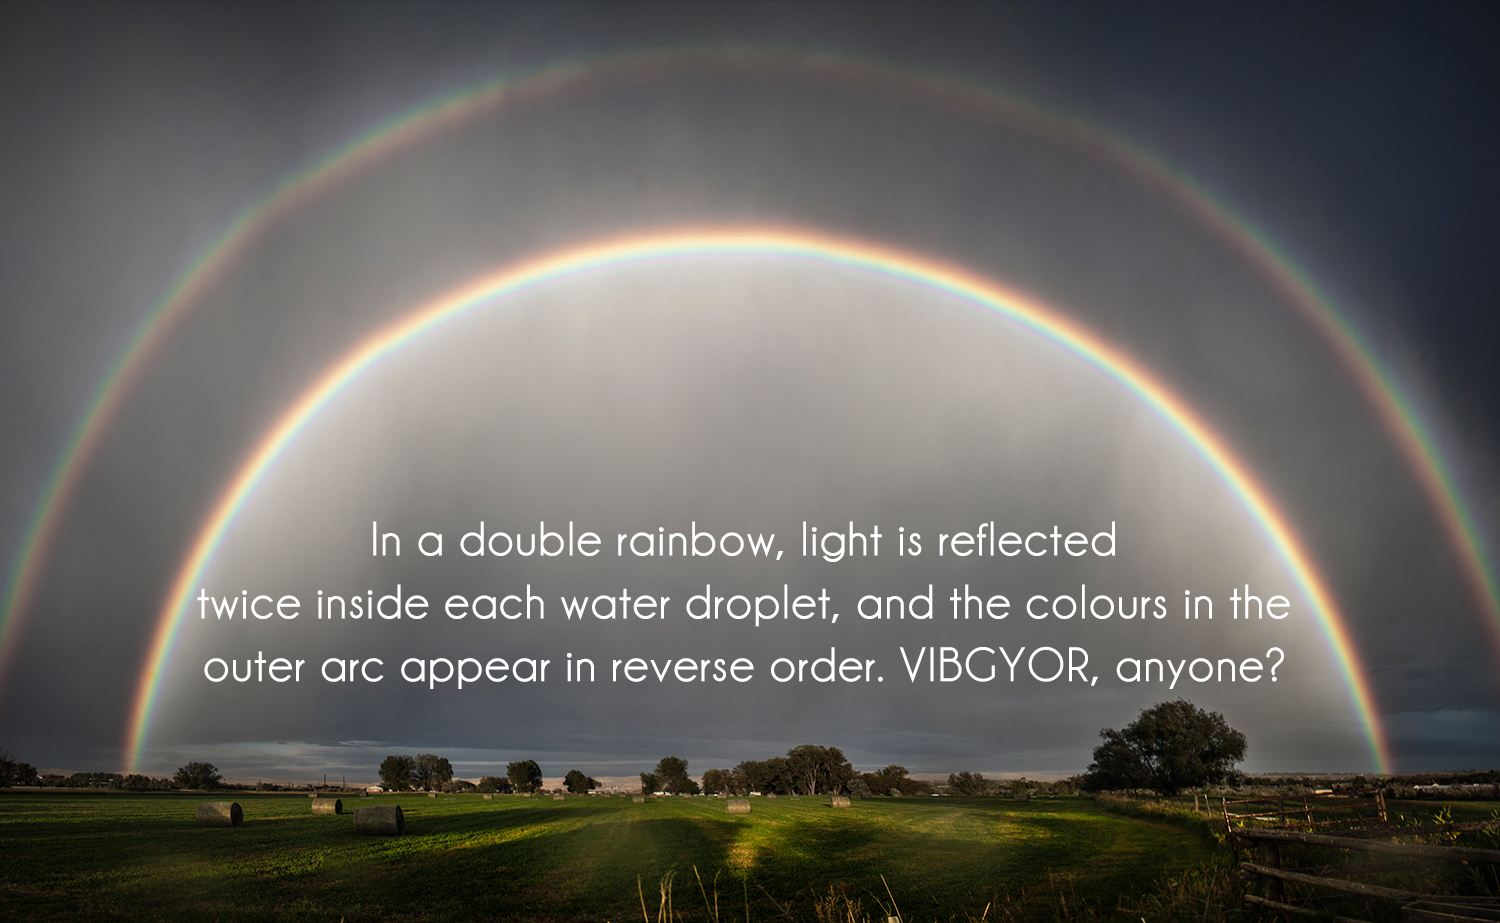 In a double rainbow, light is reflected twice inside each water droplet, and the colours in the outer arc appear in reverse order. VIBGYOR, anyone?